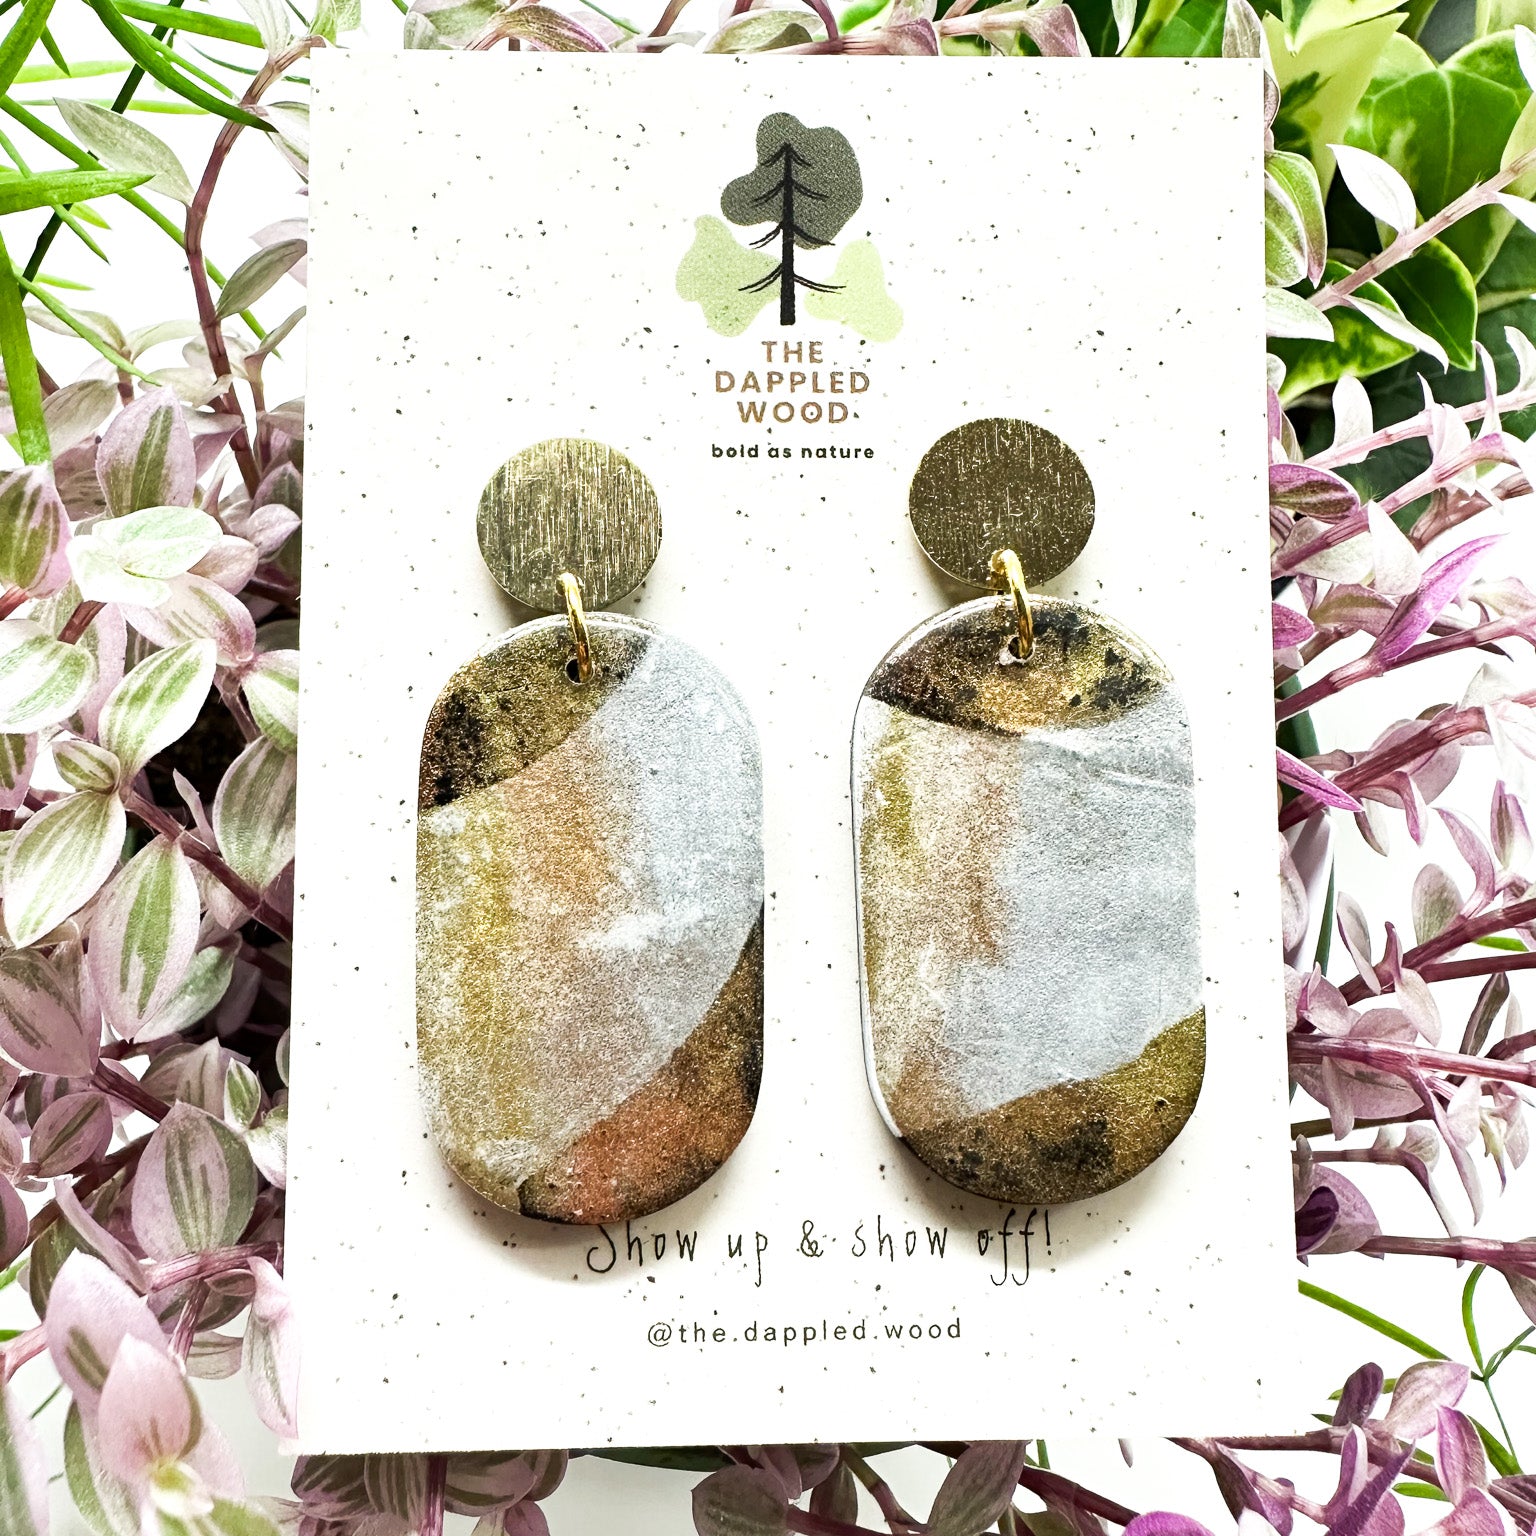 Oval-shaped polymer clay earrings with gradient earthy tones set on a white card, surrounded by delicate purple and green plants. Card bears 'The Dappled Wood' logo and the phrase 'Show up & show off!'.